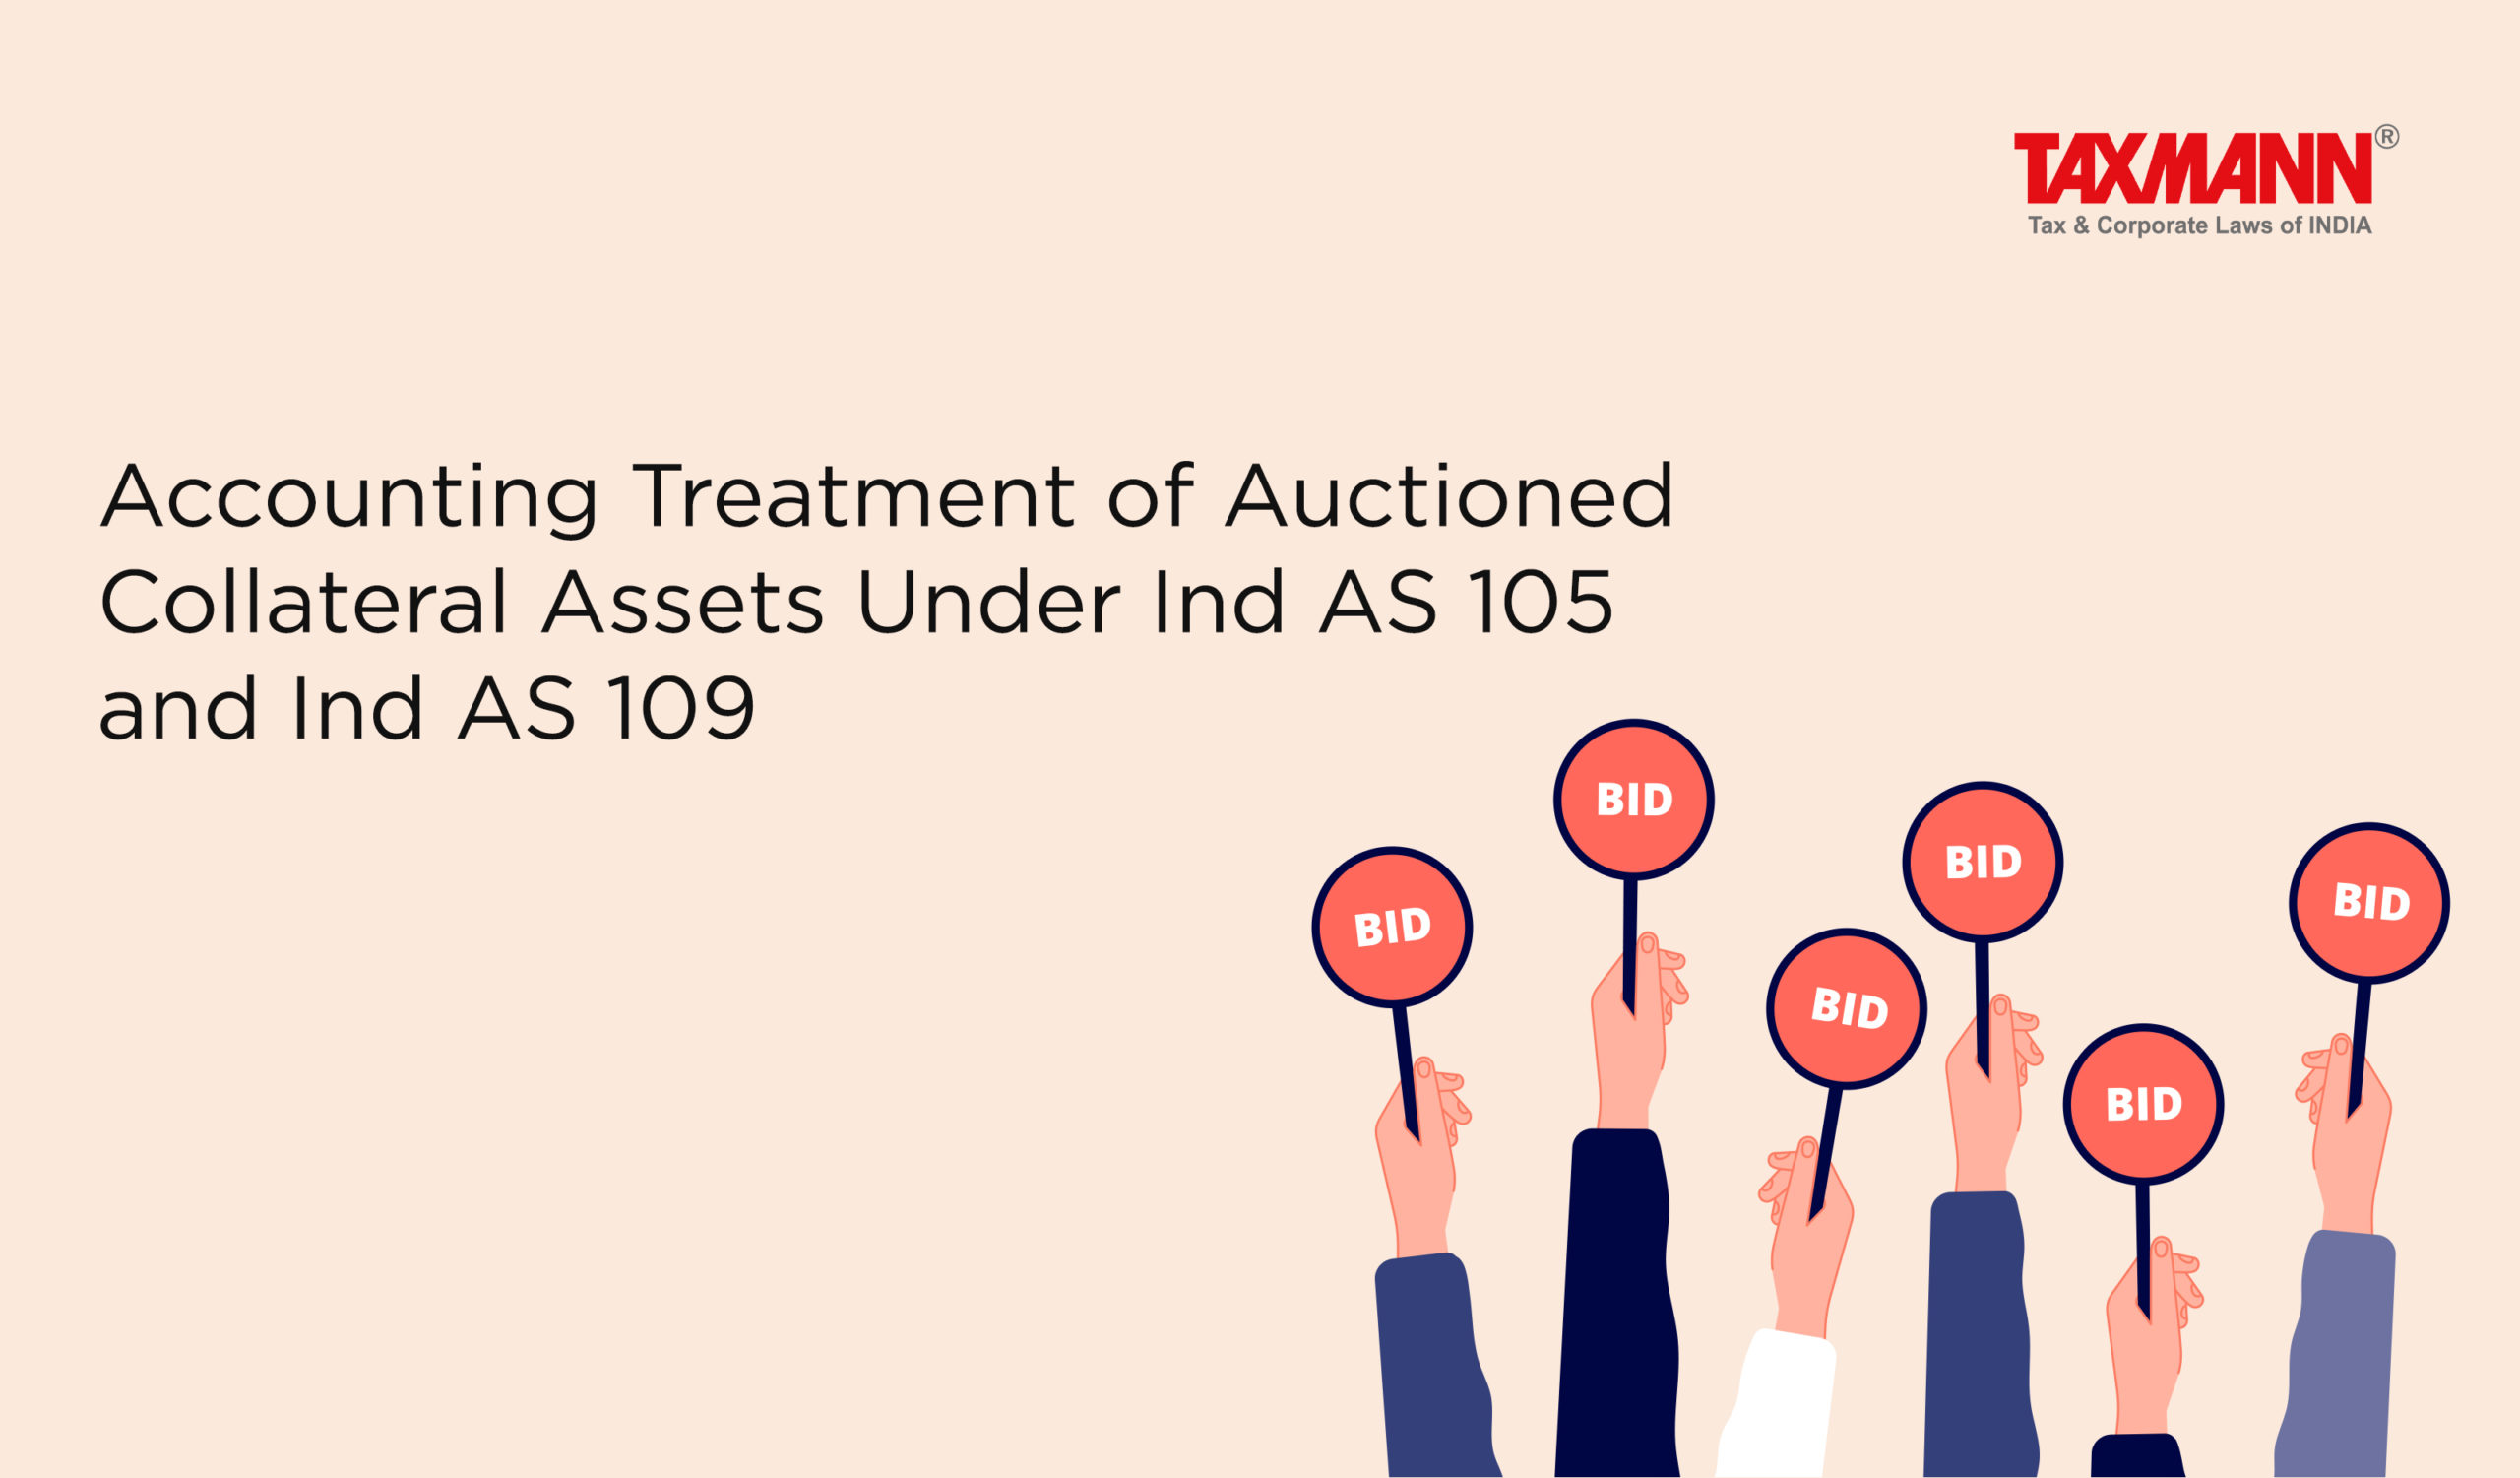 Accounting Treatment of Auctioned Collateral Assets